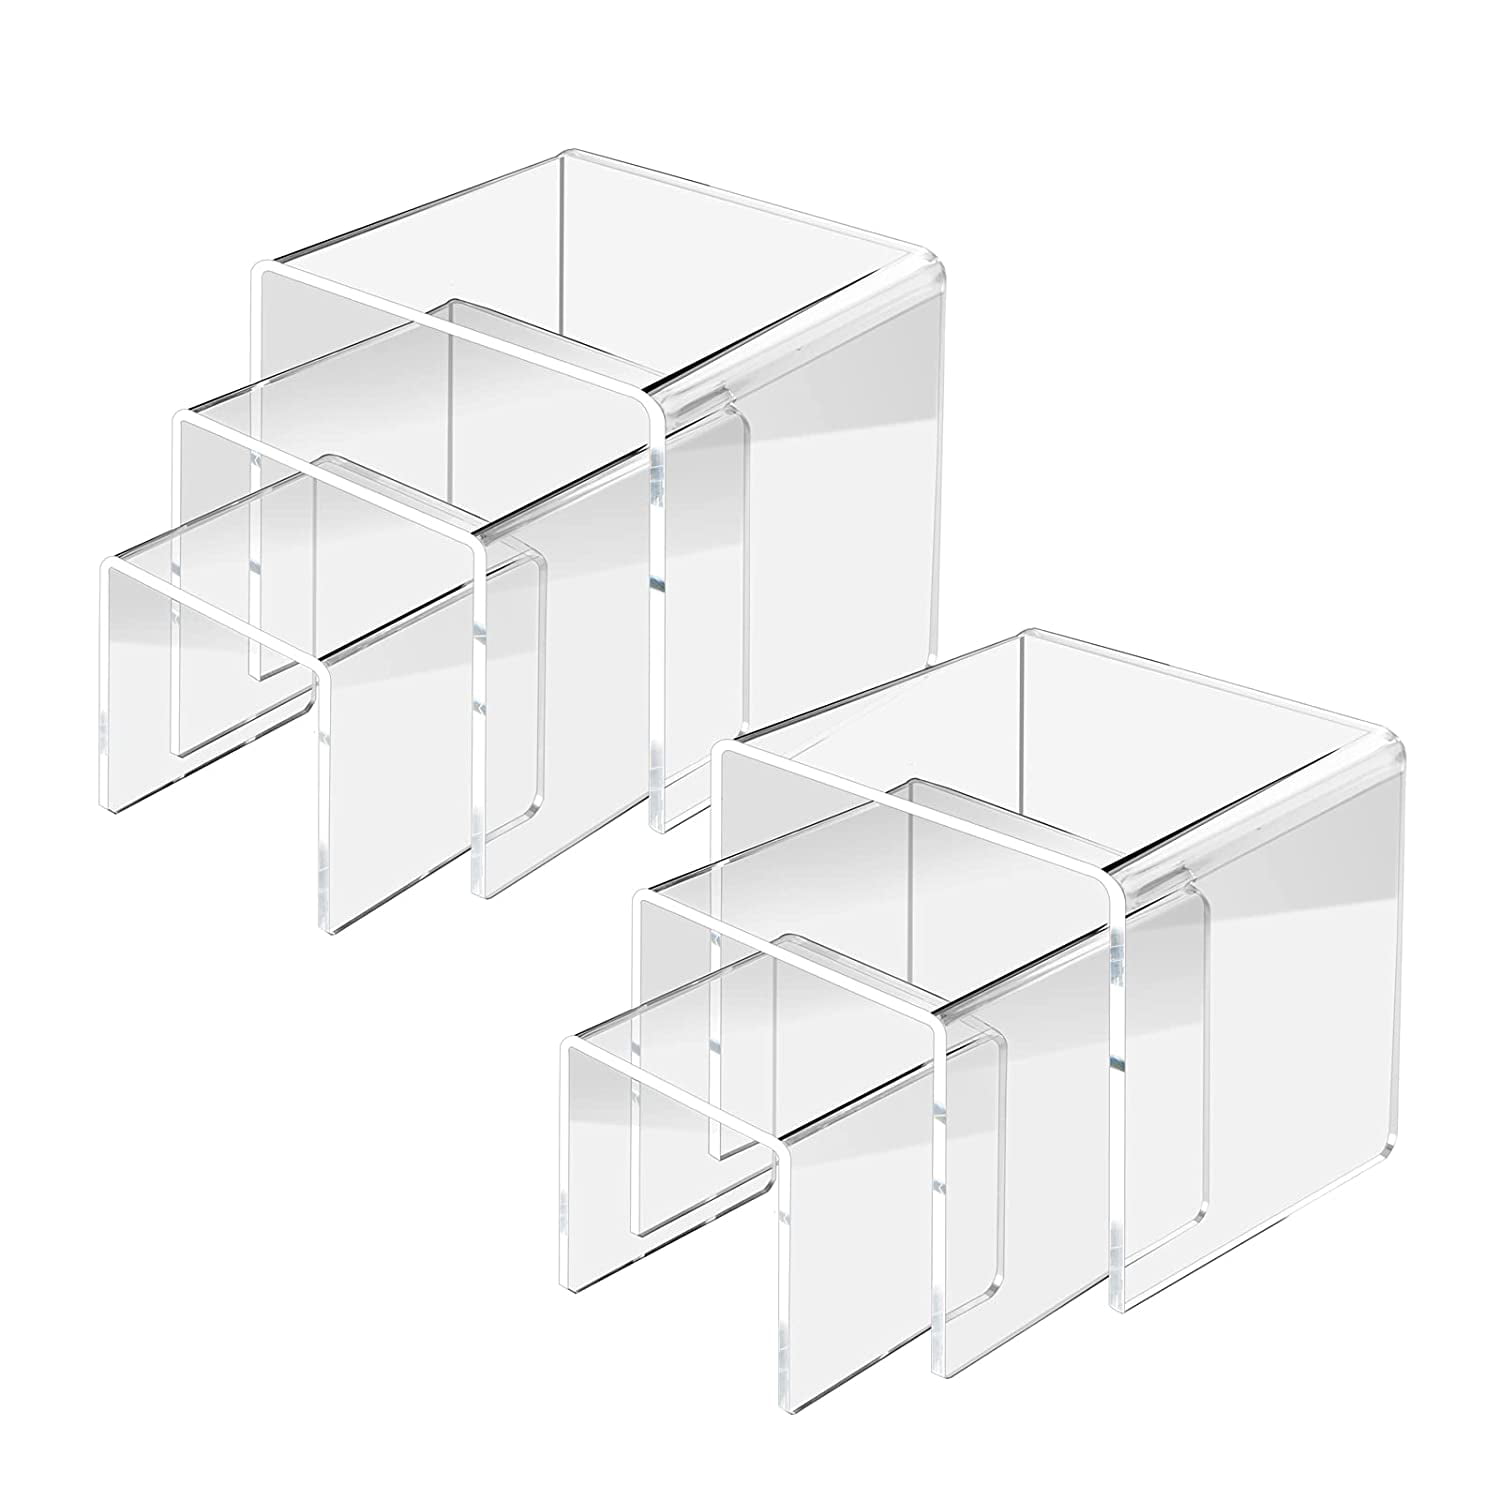 Pack of 2 Acrylic Action Figures Car Jewelry Desk Riser Display Shelf Stand 